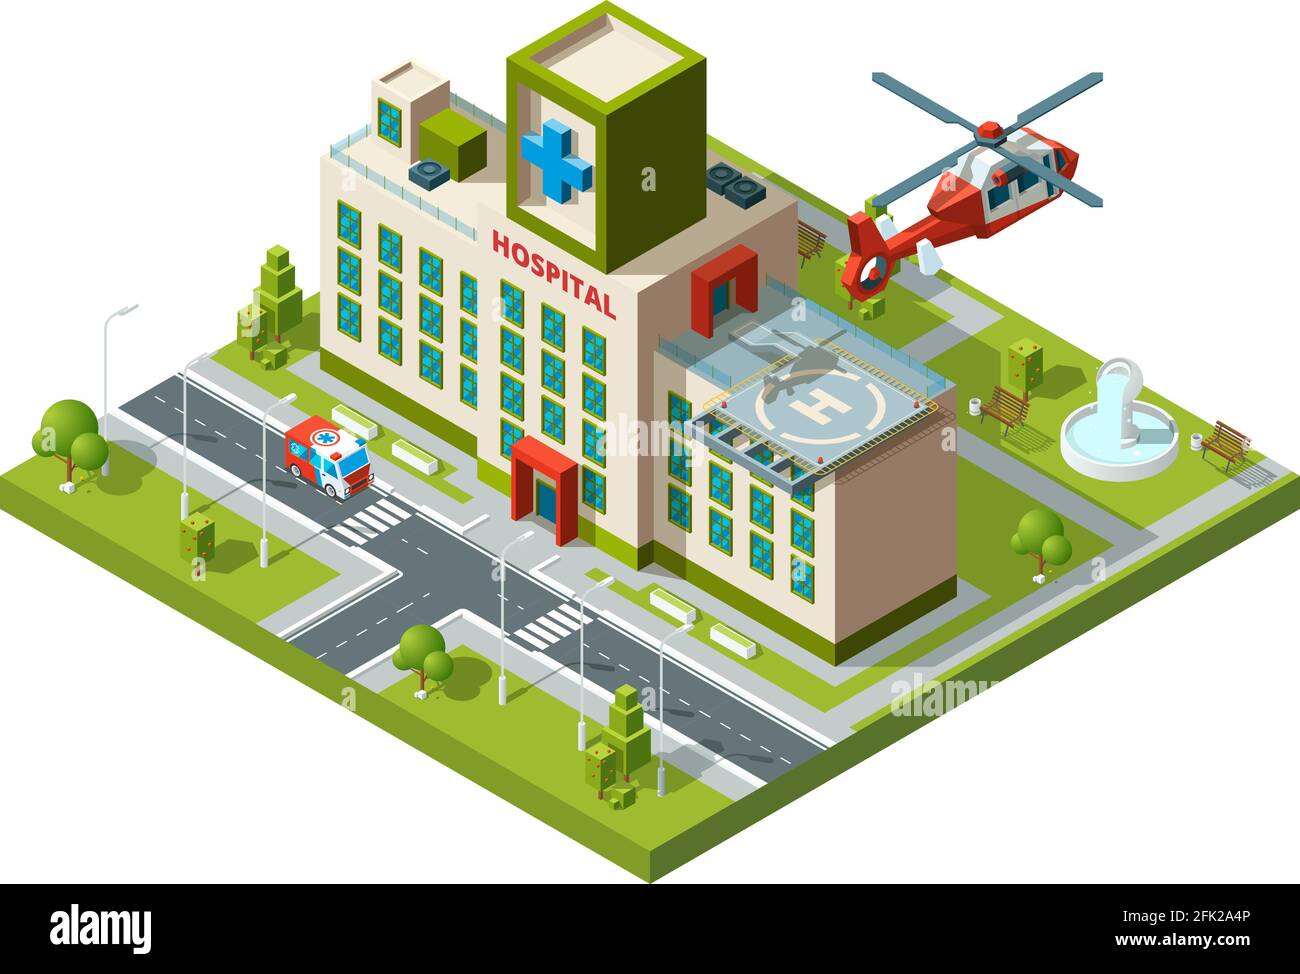 Ambulance building. Emergency transport helicopter on hospital roof helipad vector healthcare isometric Stock Vector